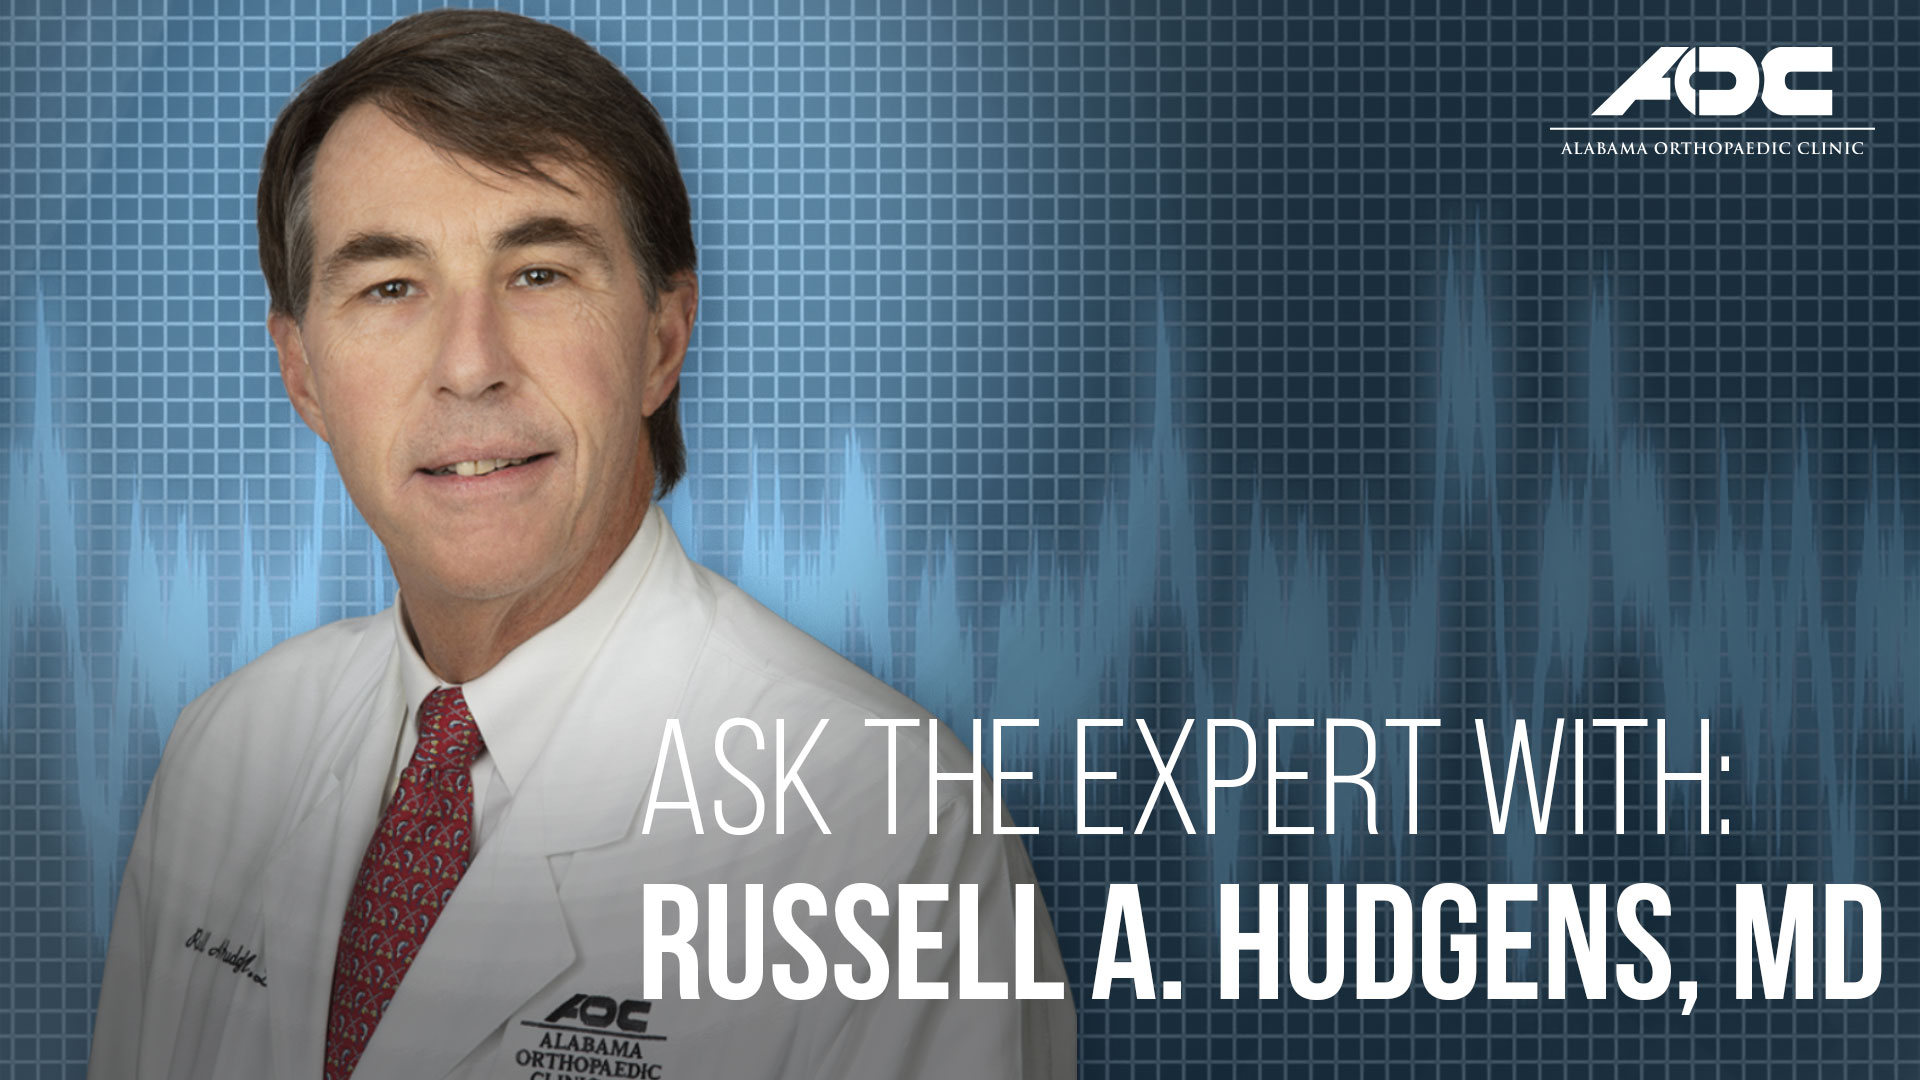 Dr. Hudgens on Uncle Henry's "Ask The Expert" Discussing Telehealth and Other AOC Safety Measures